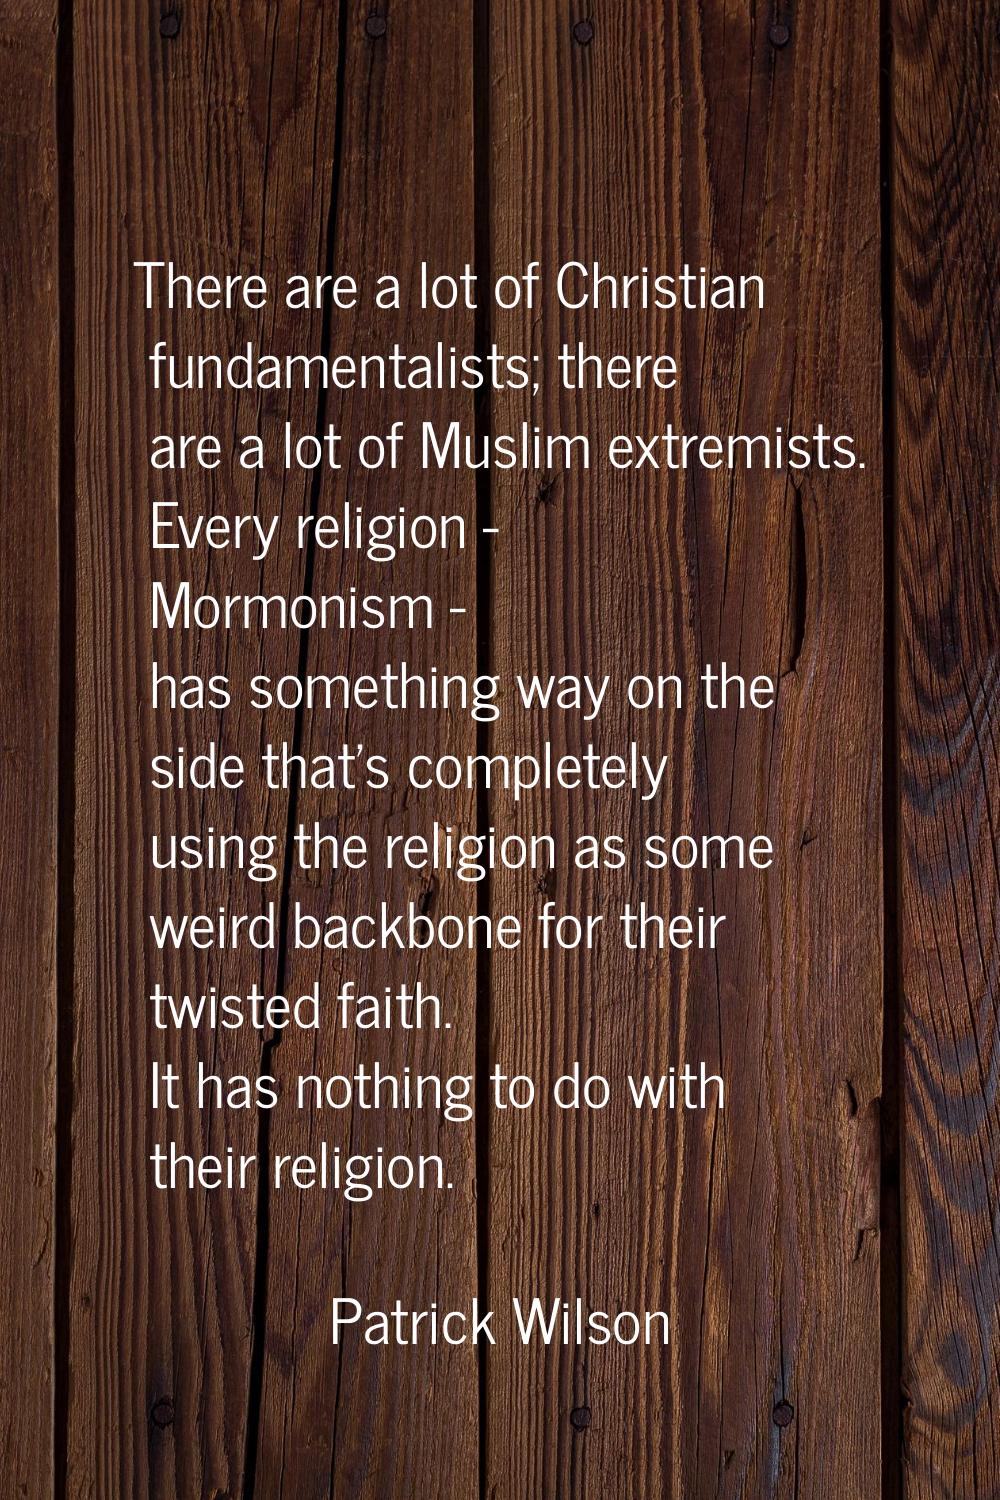 There are a lot of Christian fundamentalists; there are a lot of Muslim extremists. Every religion 